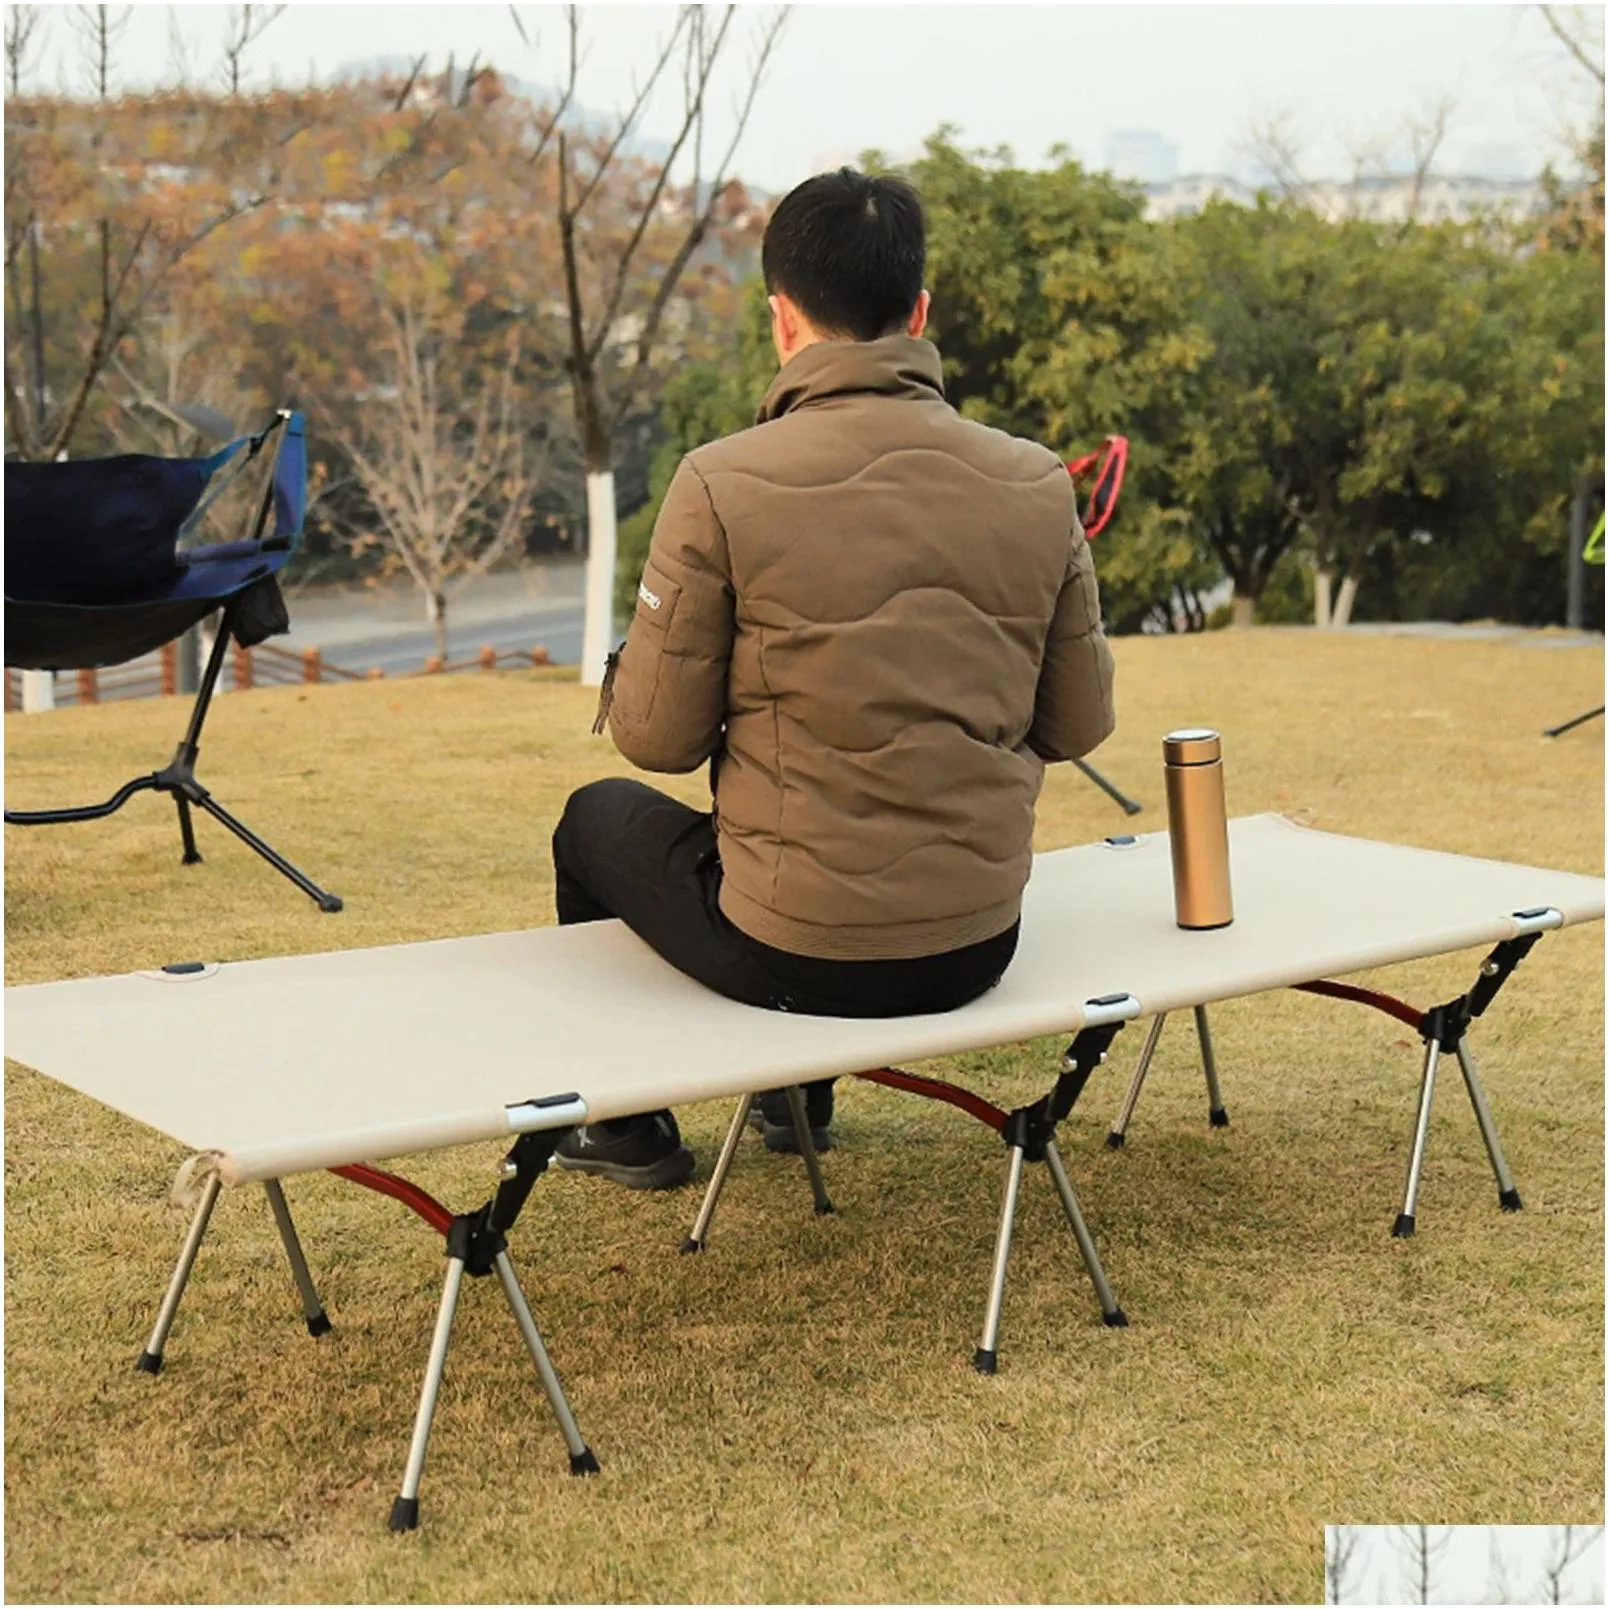 Outdoor Pads Mat Cam Slee Bed Portable Folding Cot For Picnic Hiking Backpacking Drop Delivery Sports Outdoors Camping And Otdrf